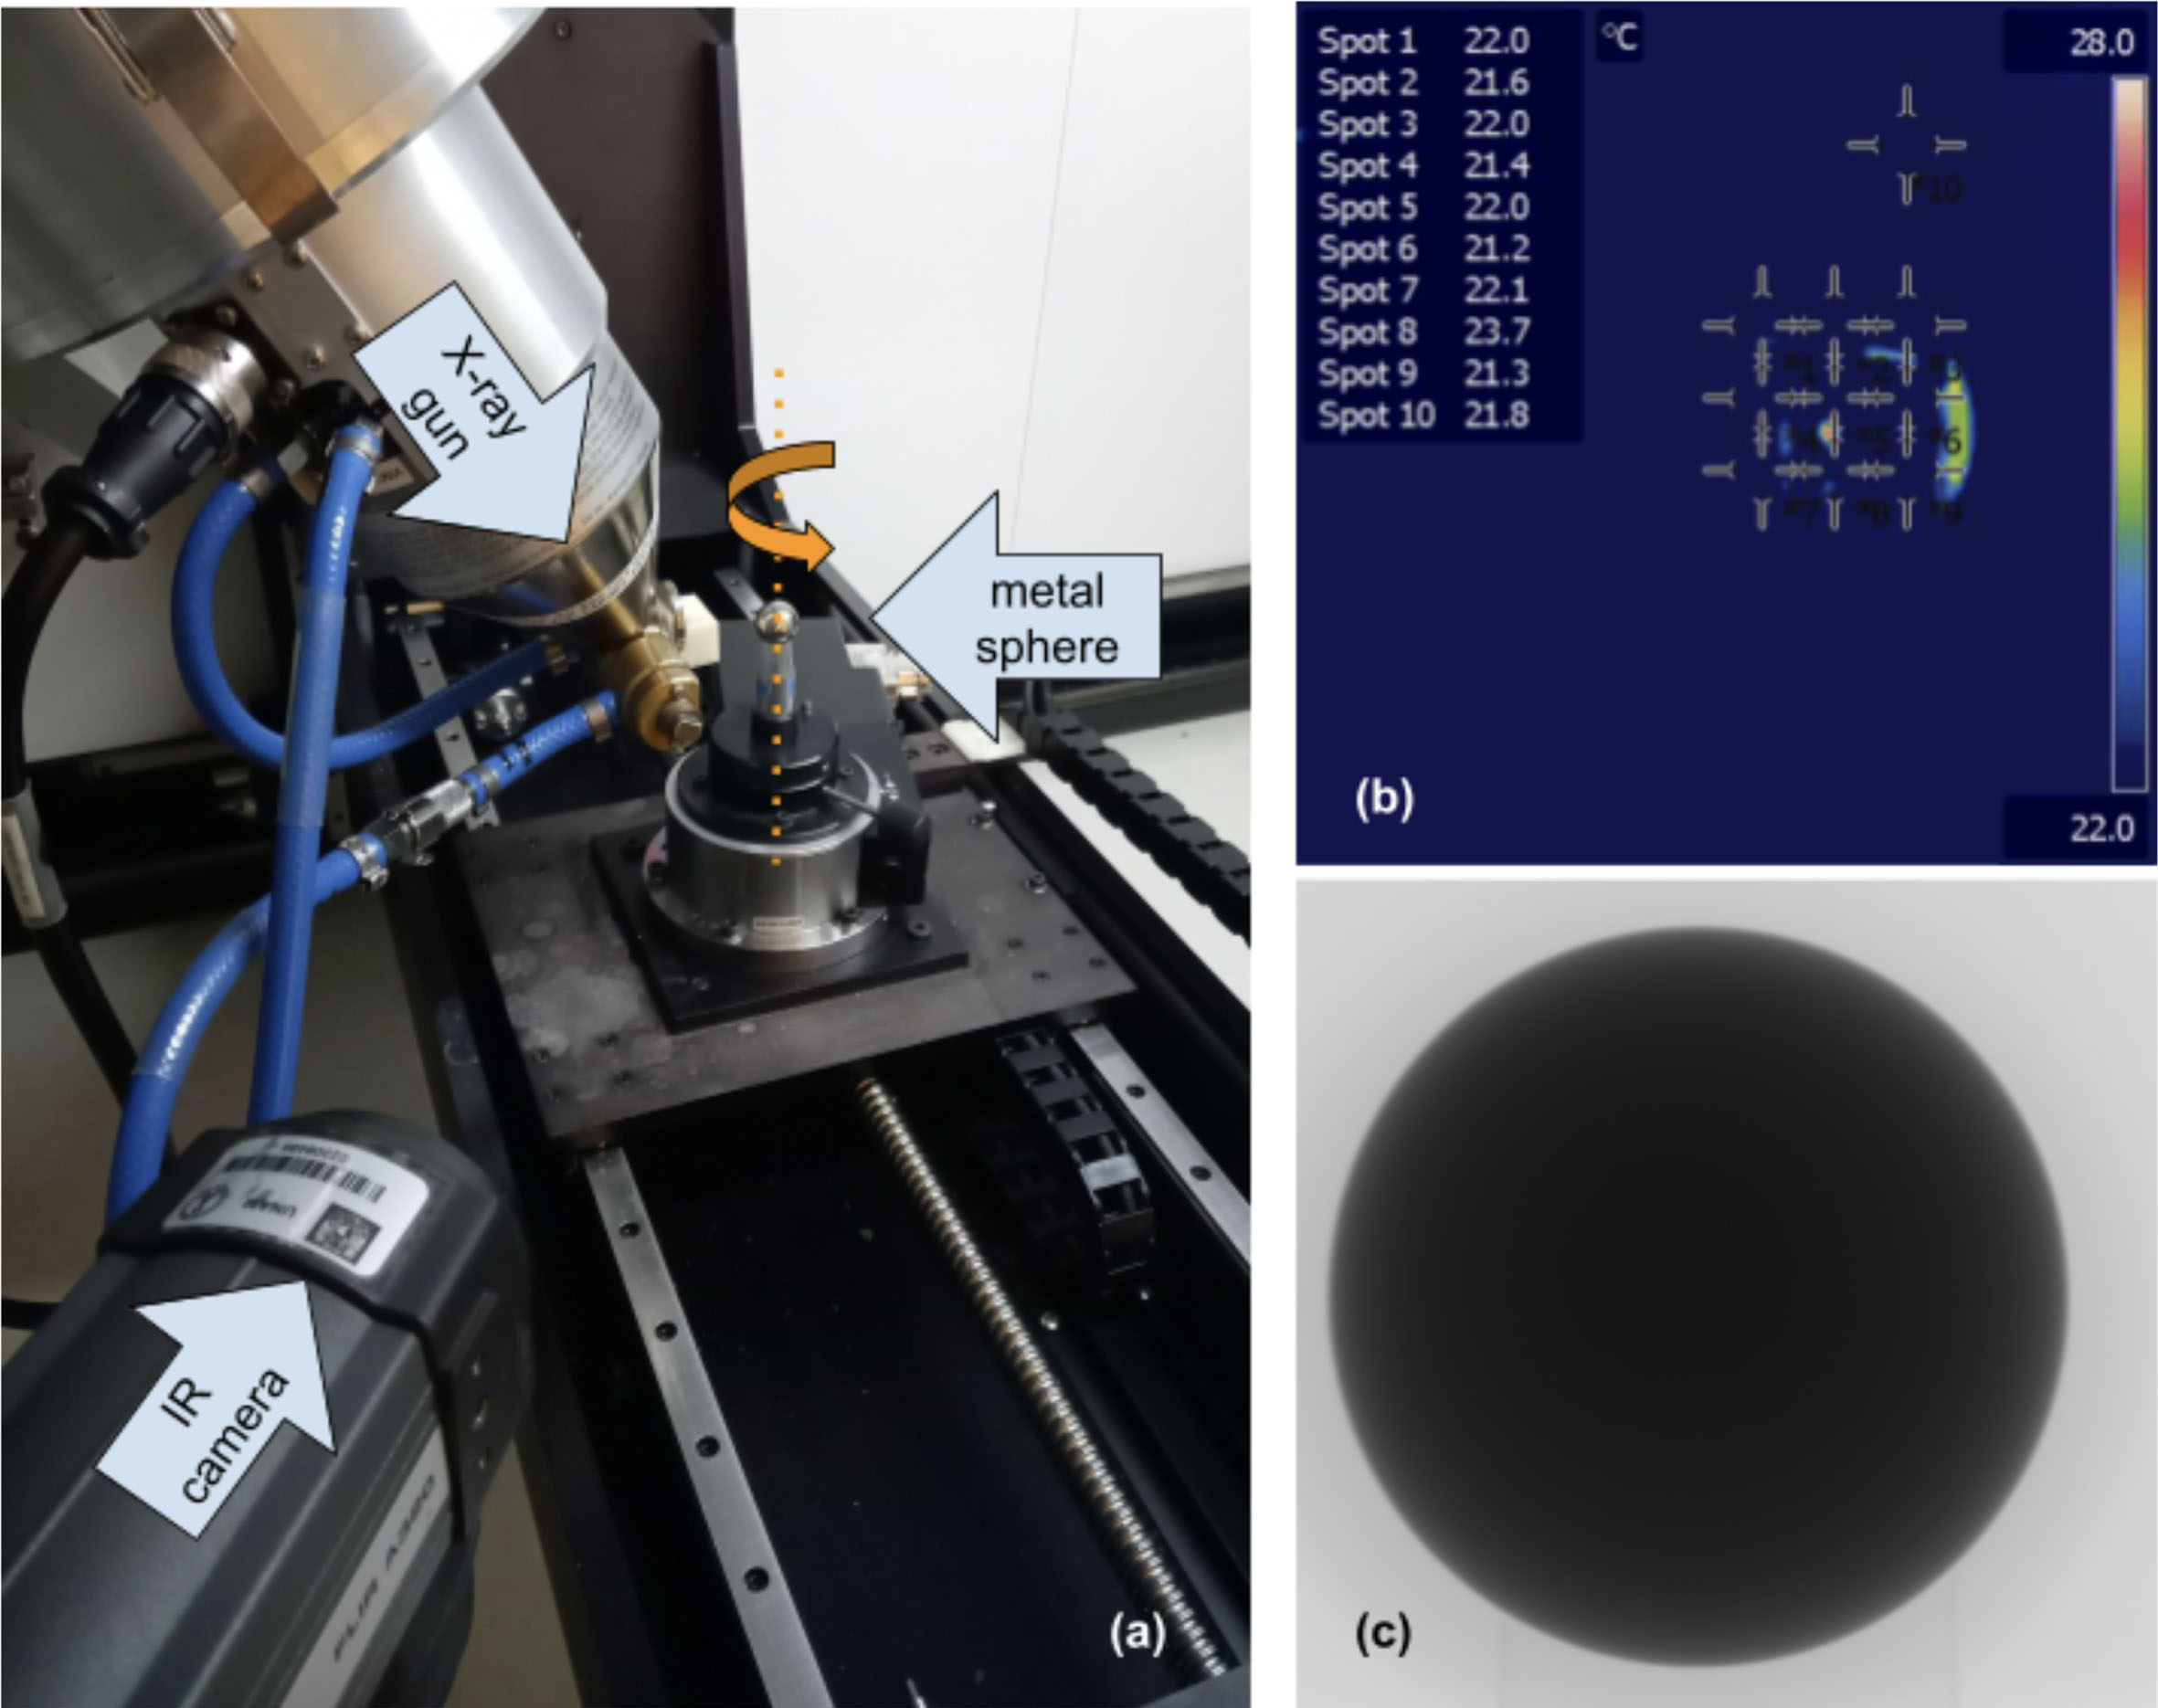 (a) The bimodal experimental setup with the industrial CT system, the rotation axis for the object of interest on the rotation stage, as well as its rotatory orientation is marked in orange; (b) IR image of the scene from the point of view of the thermal camera, and (c) a radiography of the stainless steel ball by the industrial CT.